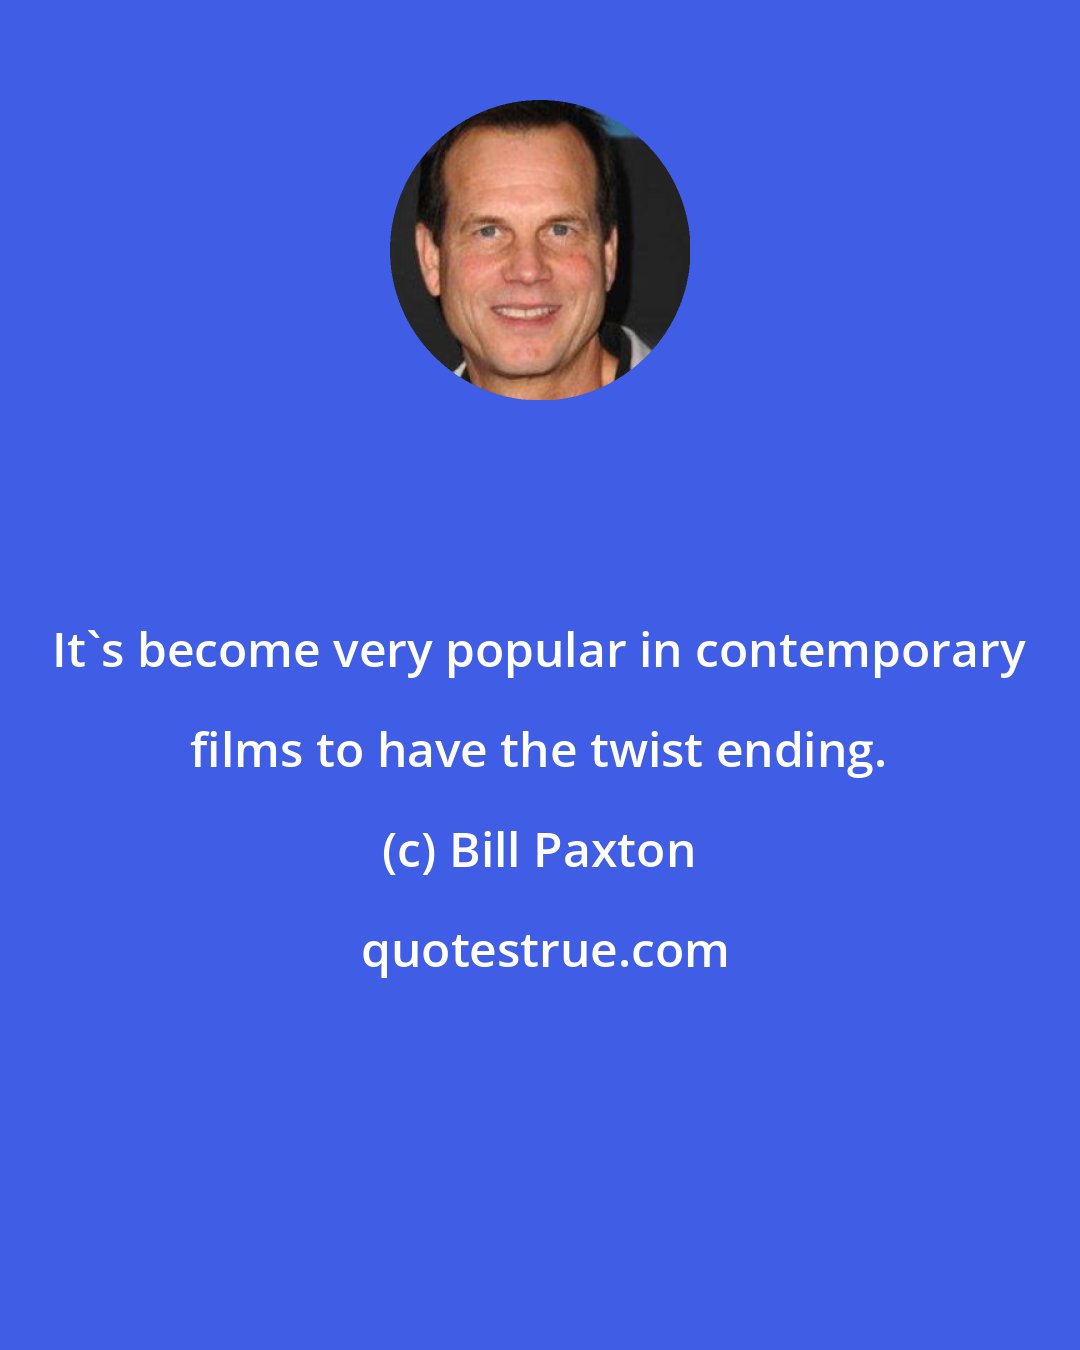 Bill Paxton: It's become very popular in contemporary films to have the twist ending.